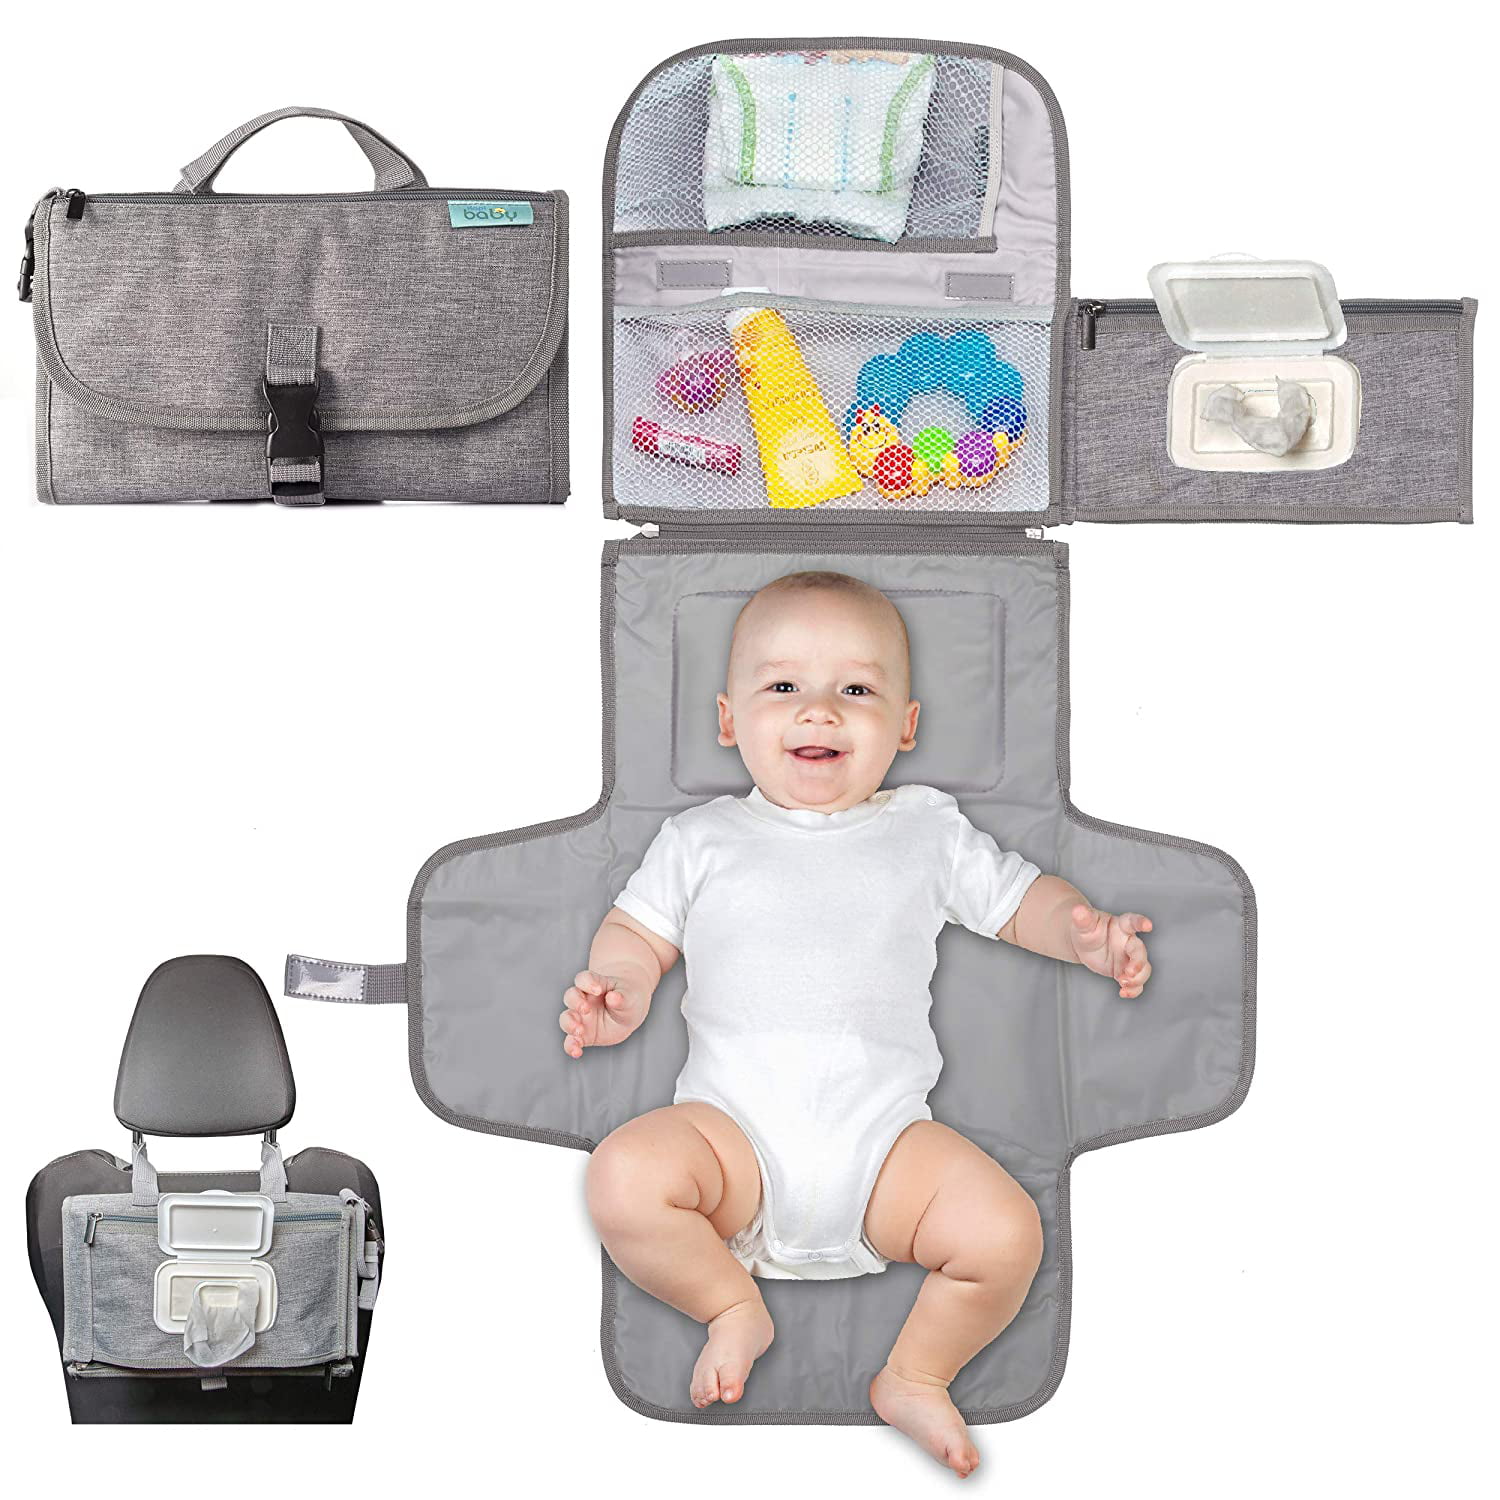 for Infants & Newborns Portable Diaper Changing Pad Diaper Bag Mat Grey & White Pockets for Wipes Foldable Travel Changing Station Stroller Strap Portable Changing Pad Carry Handle